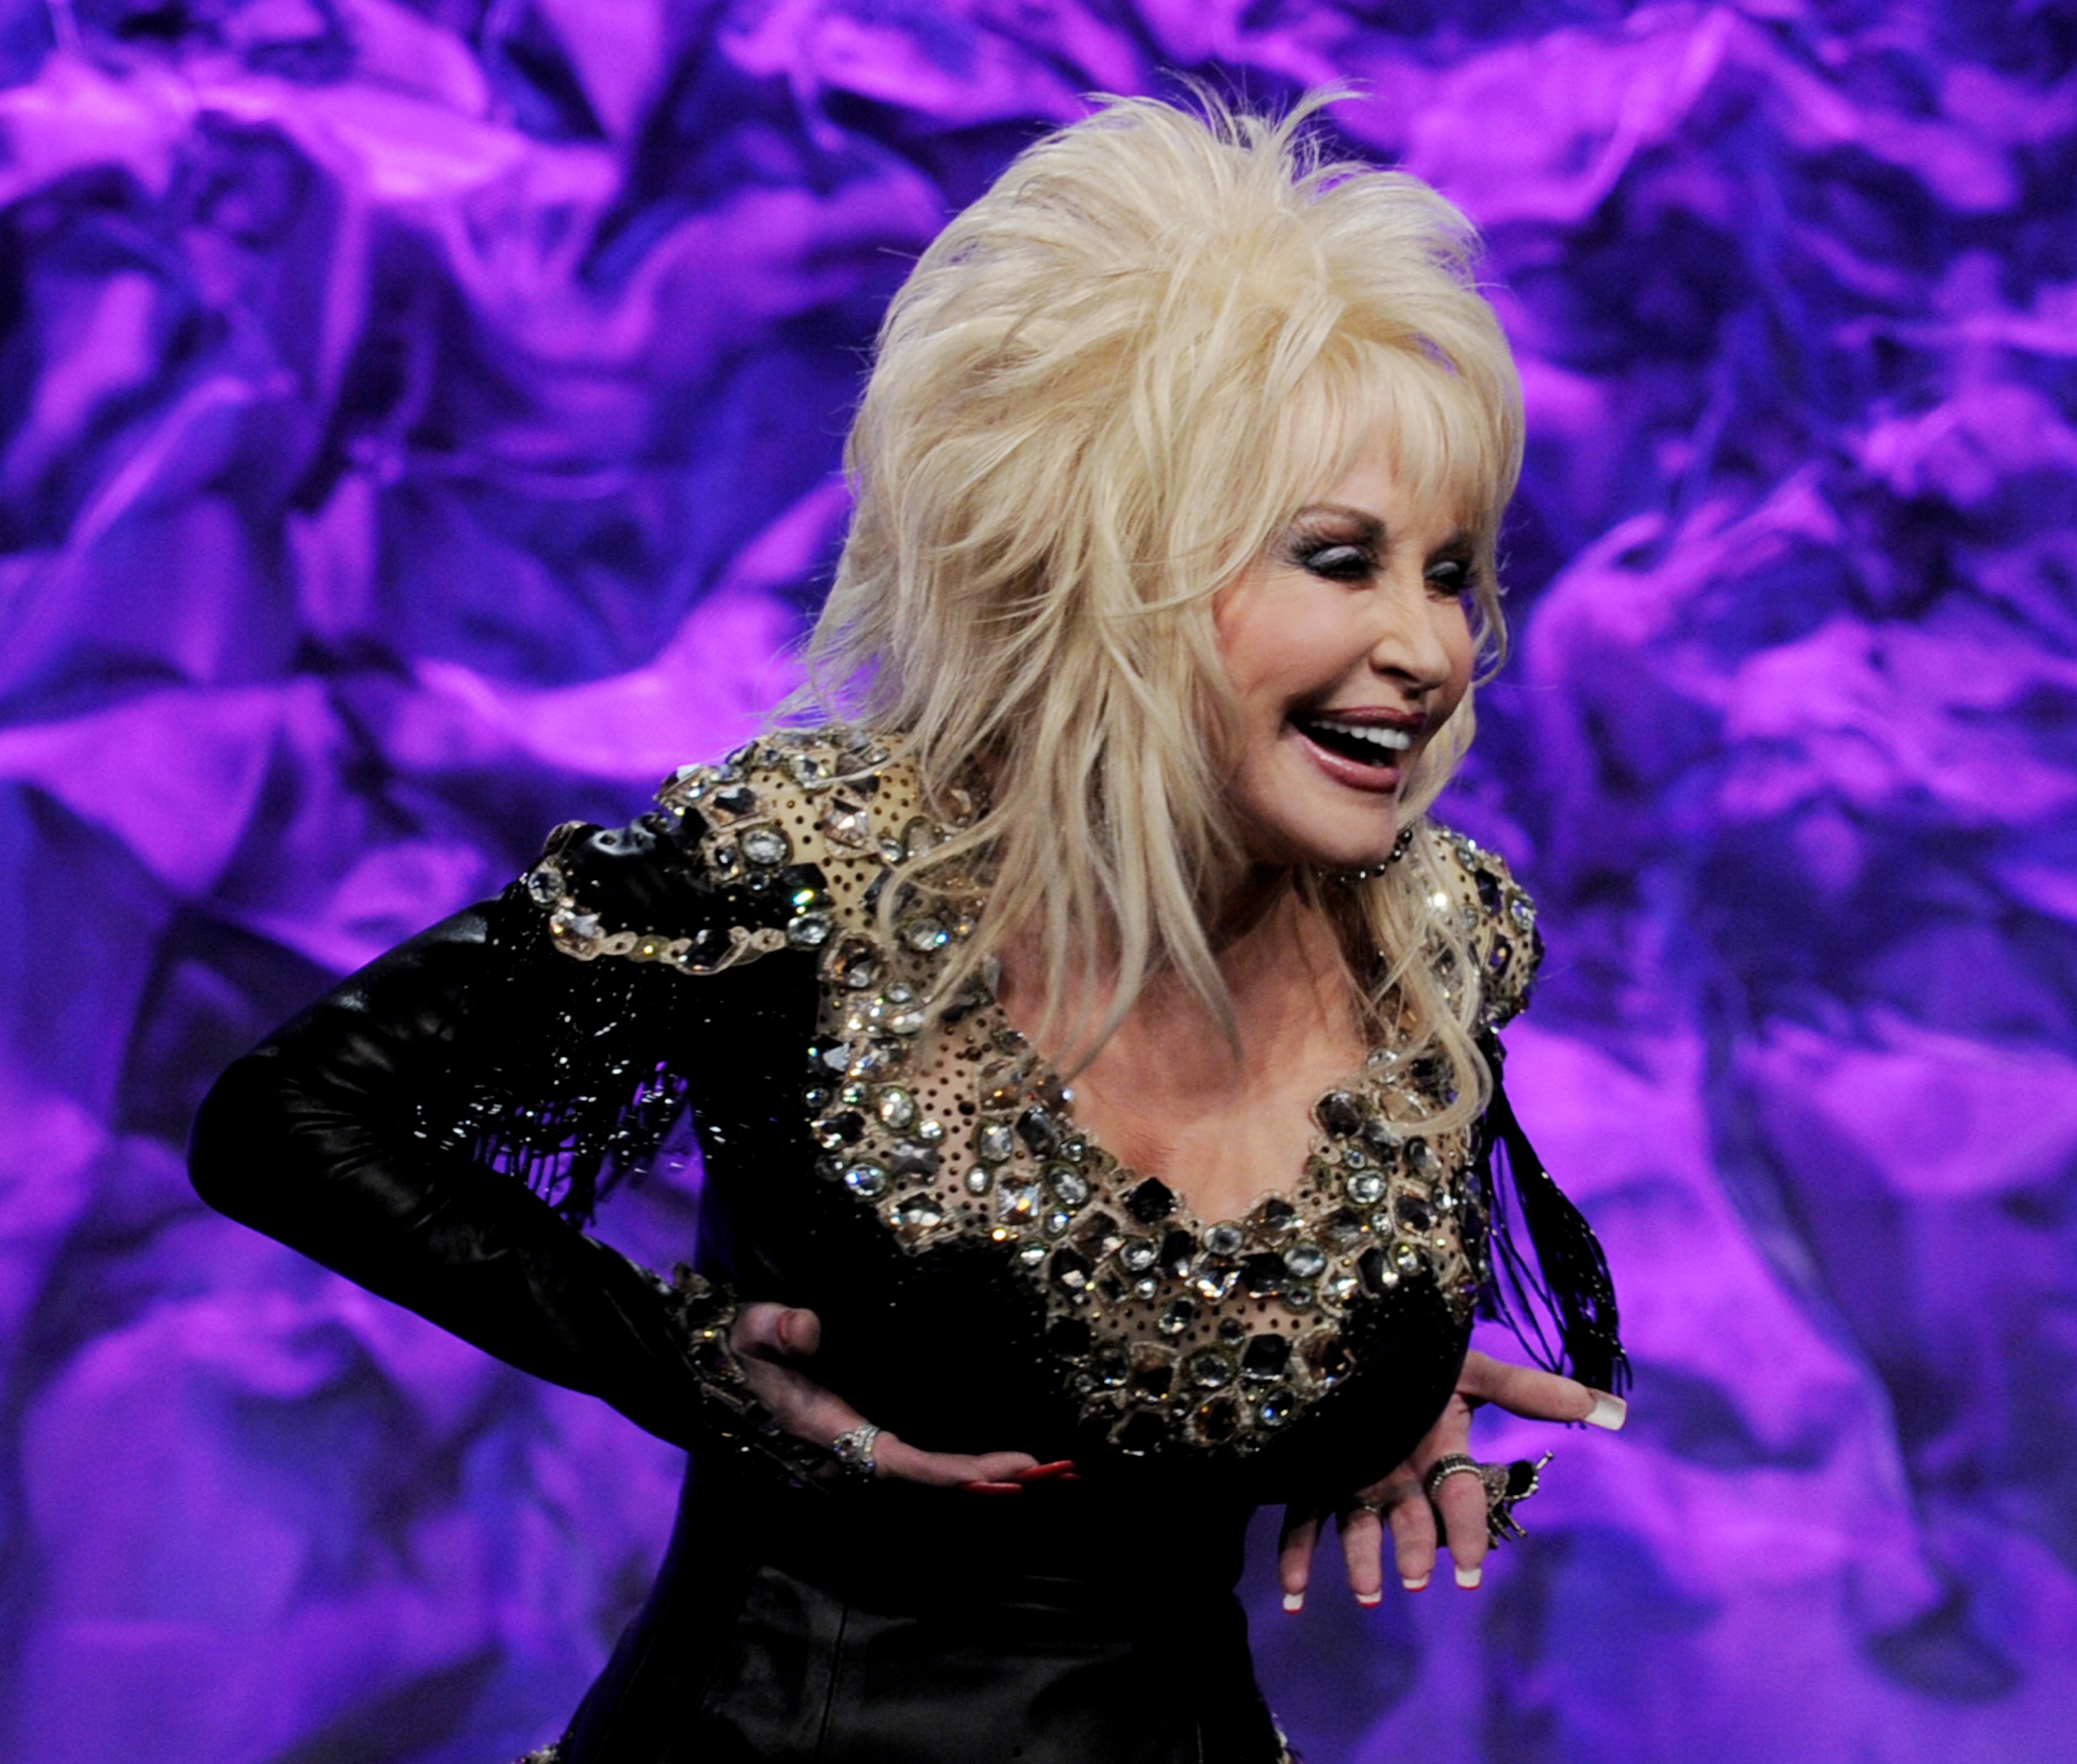 Dolly Parton on stage at the 22nd Annual GLAAD Media Awards.